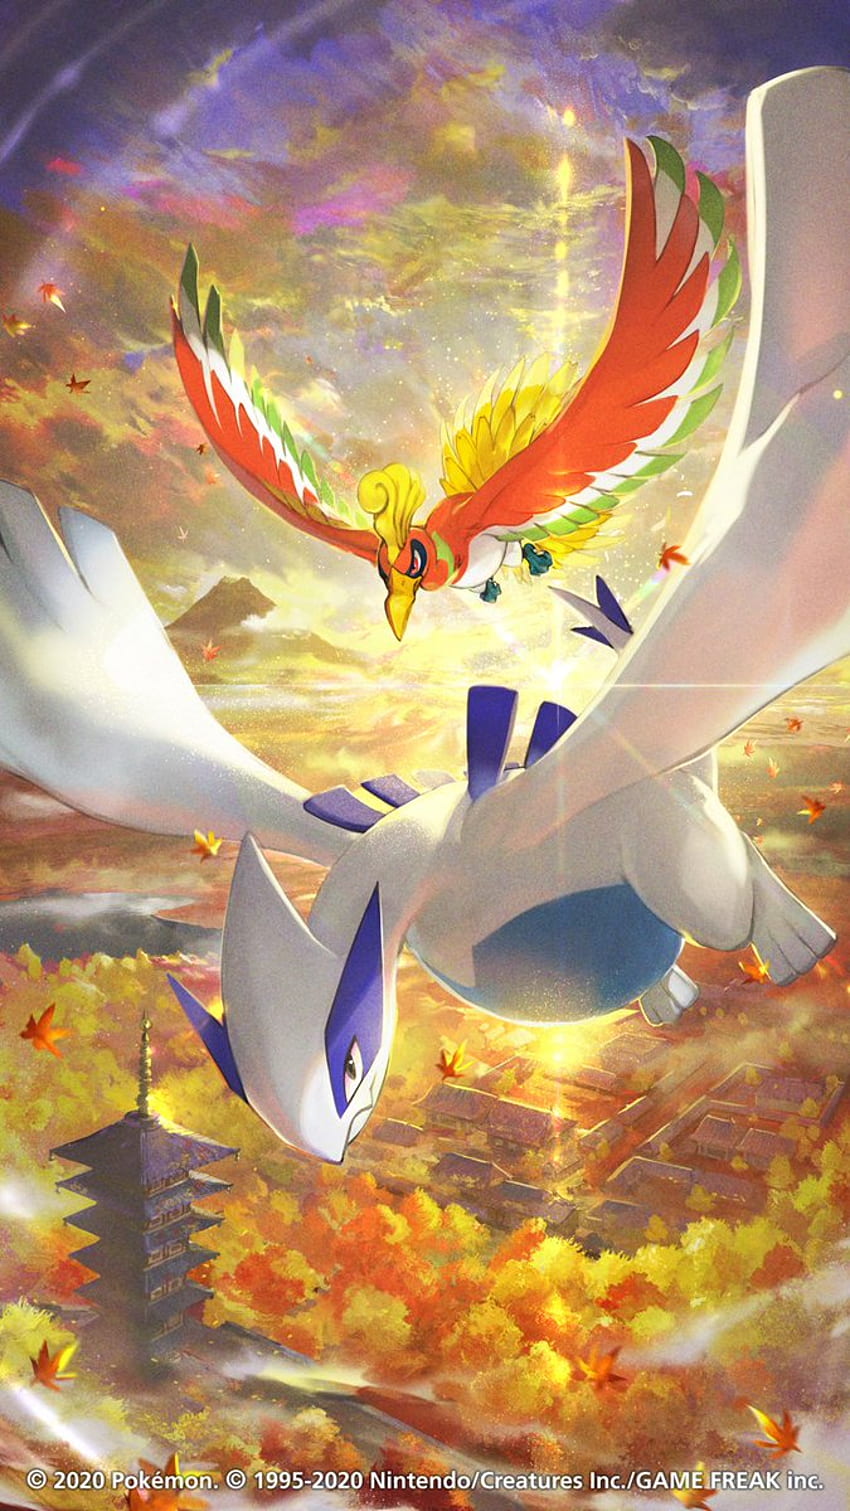 PLDH The Second Legendary Pokémon Has Been Shared In Anticipation Of The Crown Tundra Expansion! This Time We See Ho Oh And Lugia Soaring Over Ecruteak City!, Cool Lugia HD phone wallpaper